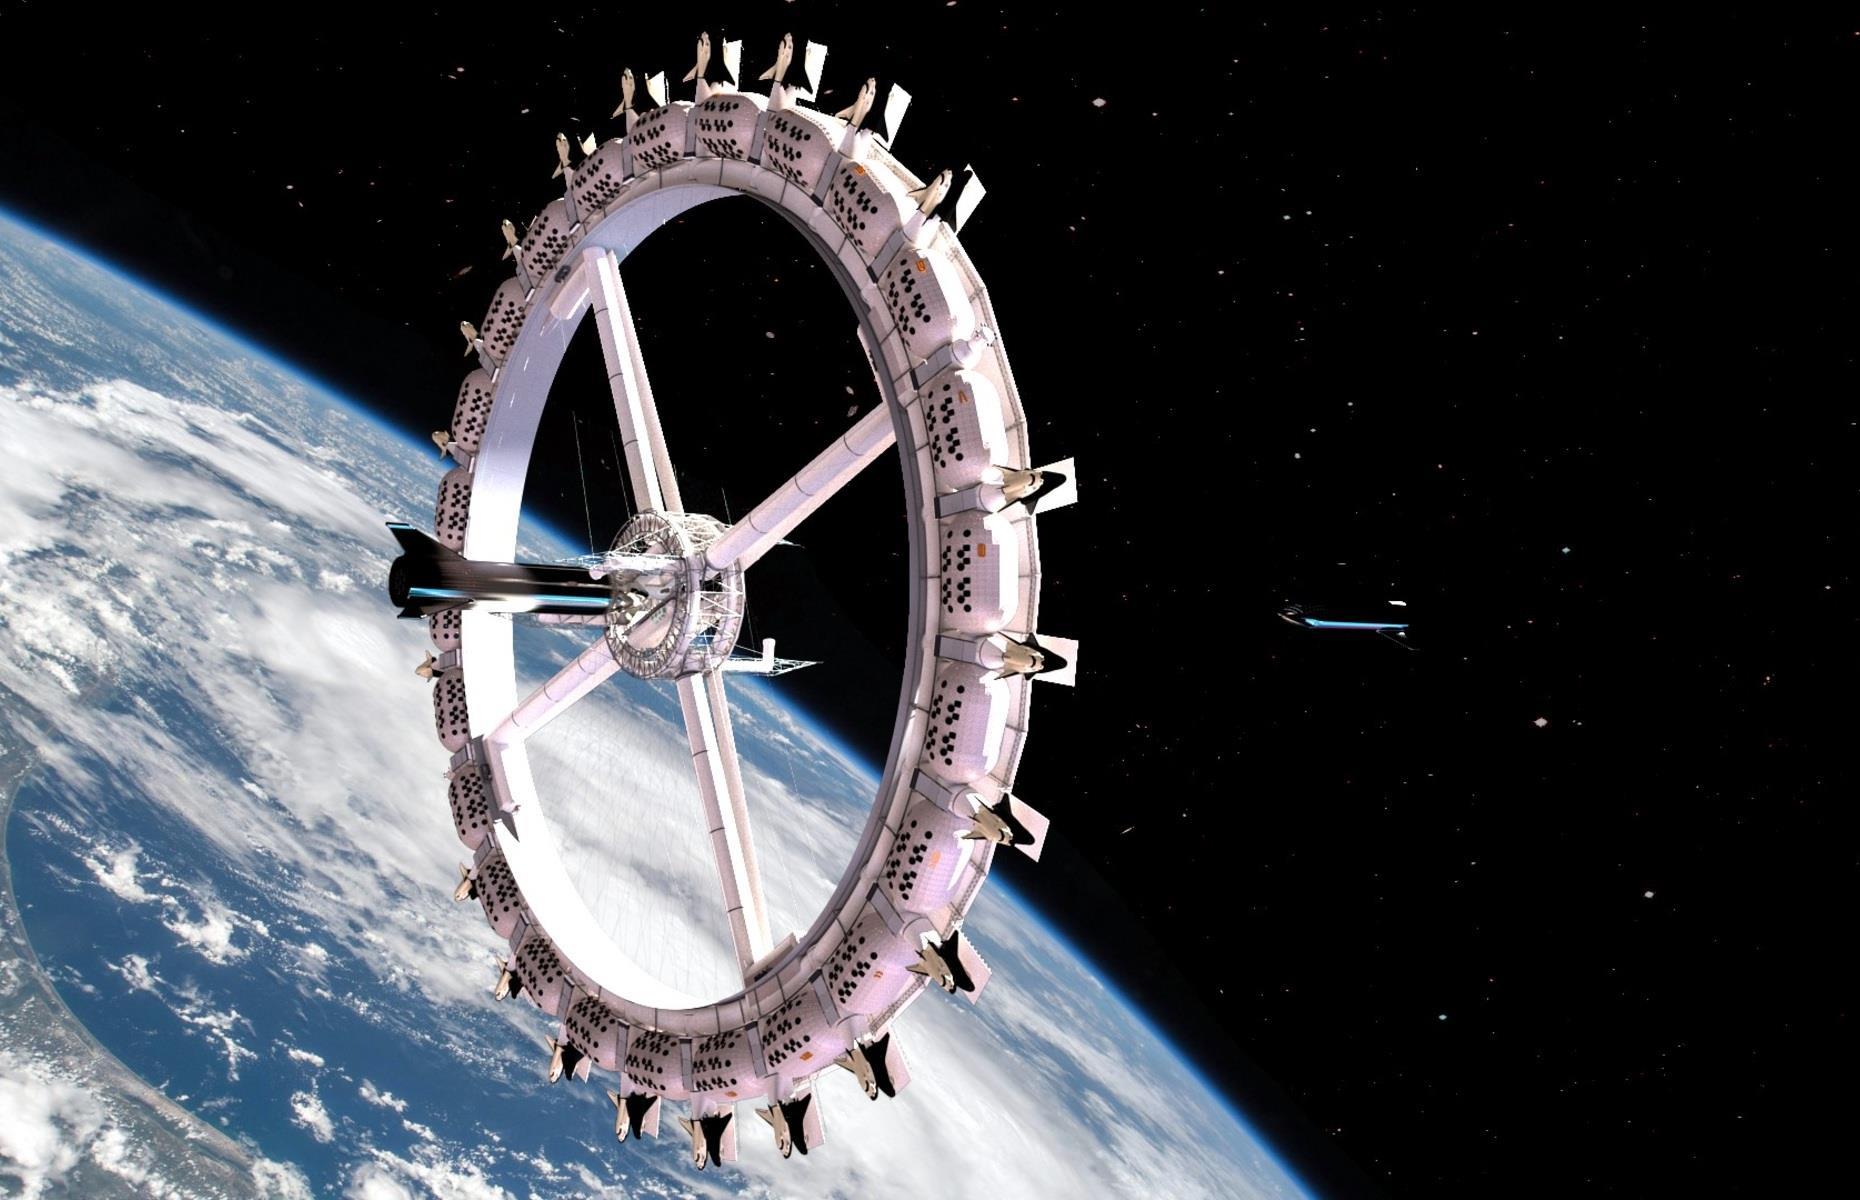 Never mind flying to distant shores for your next trip – how about catapulting yourself into space? While it might sound far-fetched, it could soon be a reality. A new space hotel, designed by space construction company Orbital Assembly Corporation, is currently being built and could soon be available for an out-of-this-world vacation. Read on to discover what it’ll look like and when the first guests will be able to check-in.